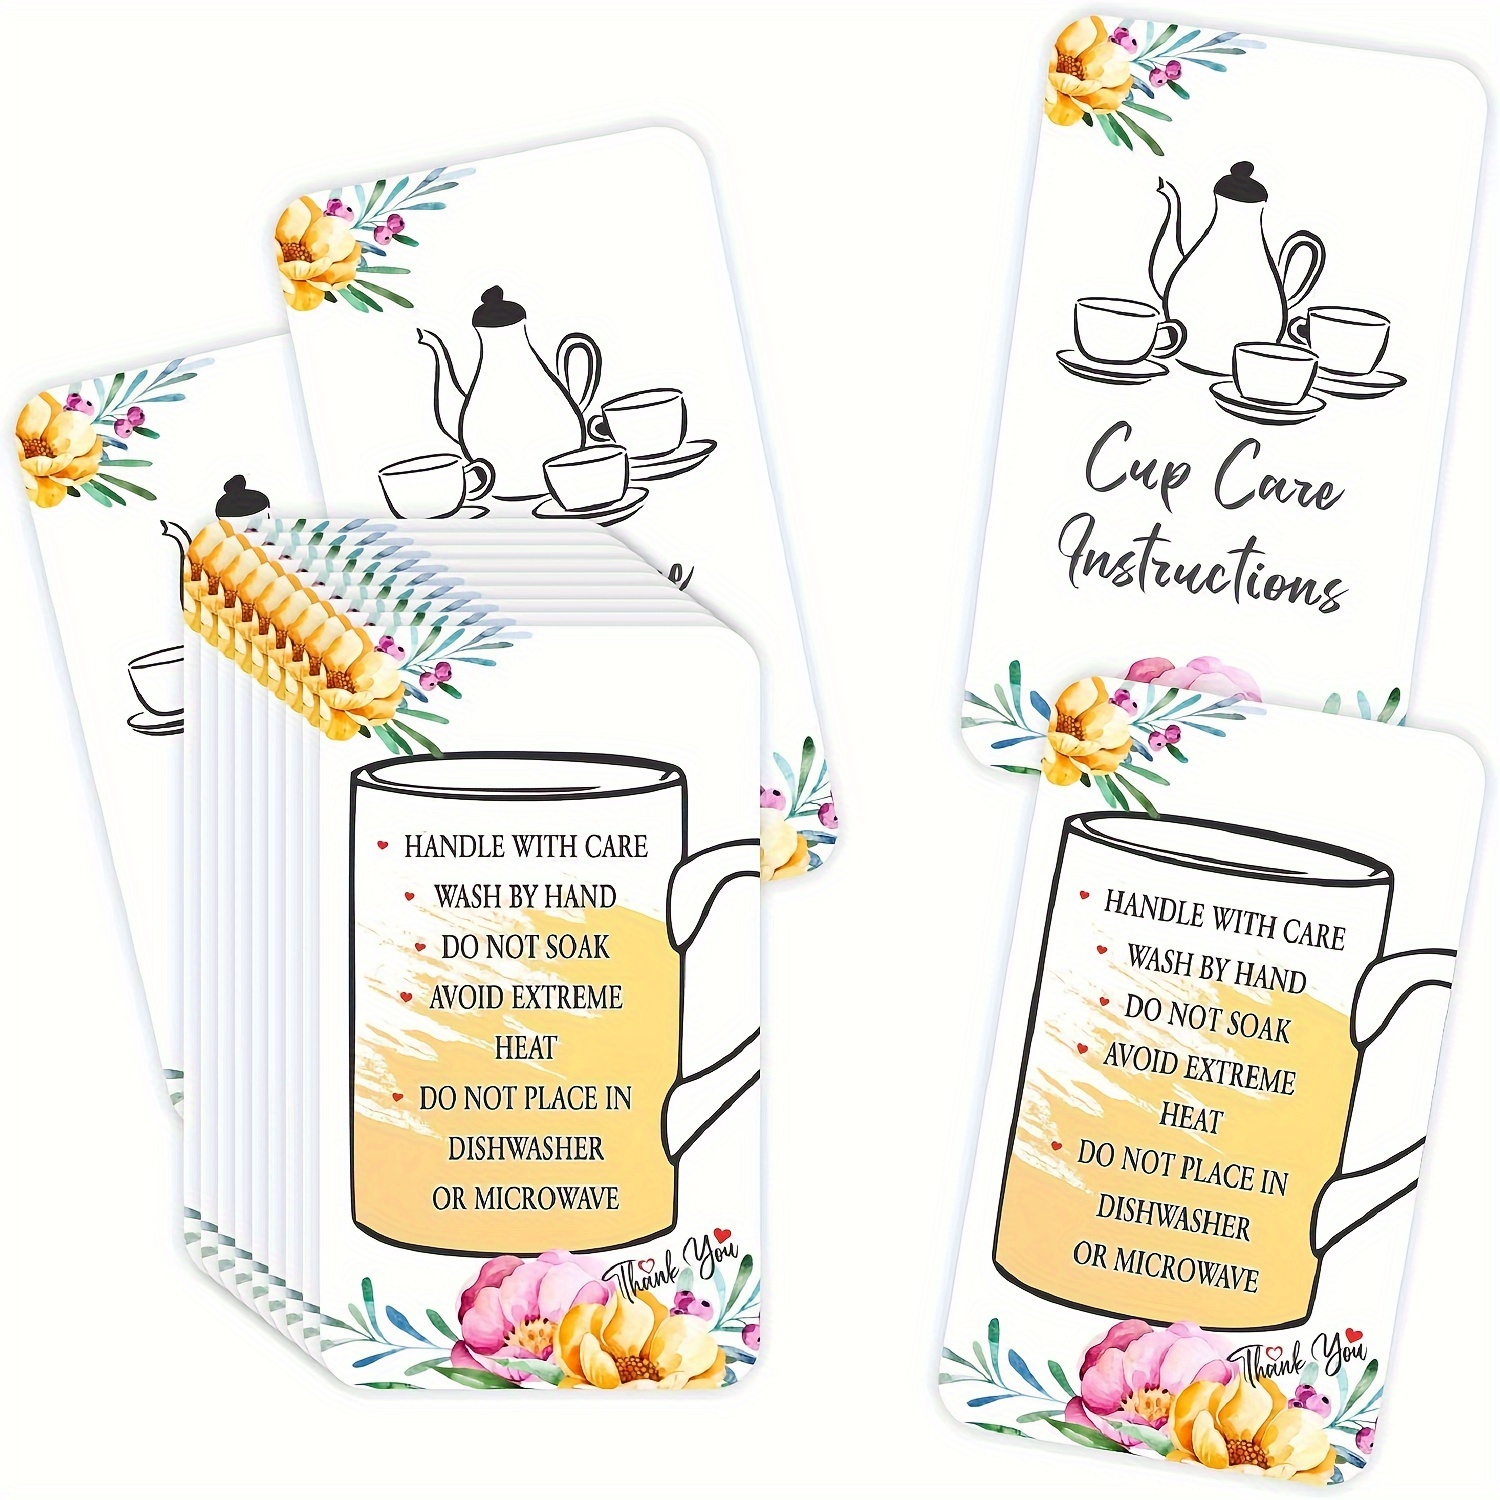 Fall Care Card Bundle, Printable Care Instructions Cards